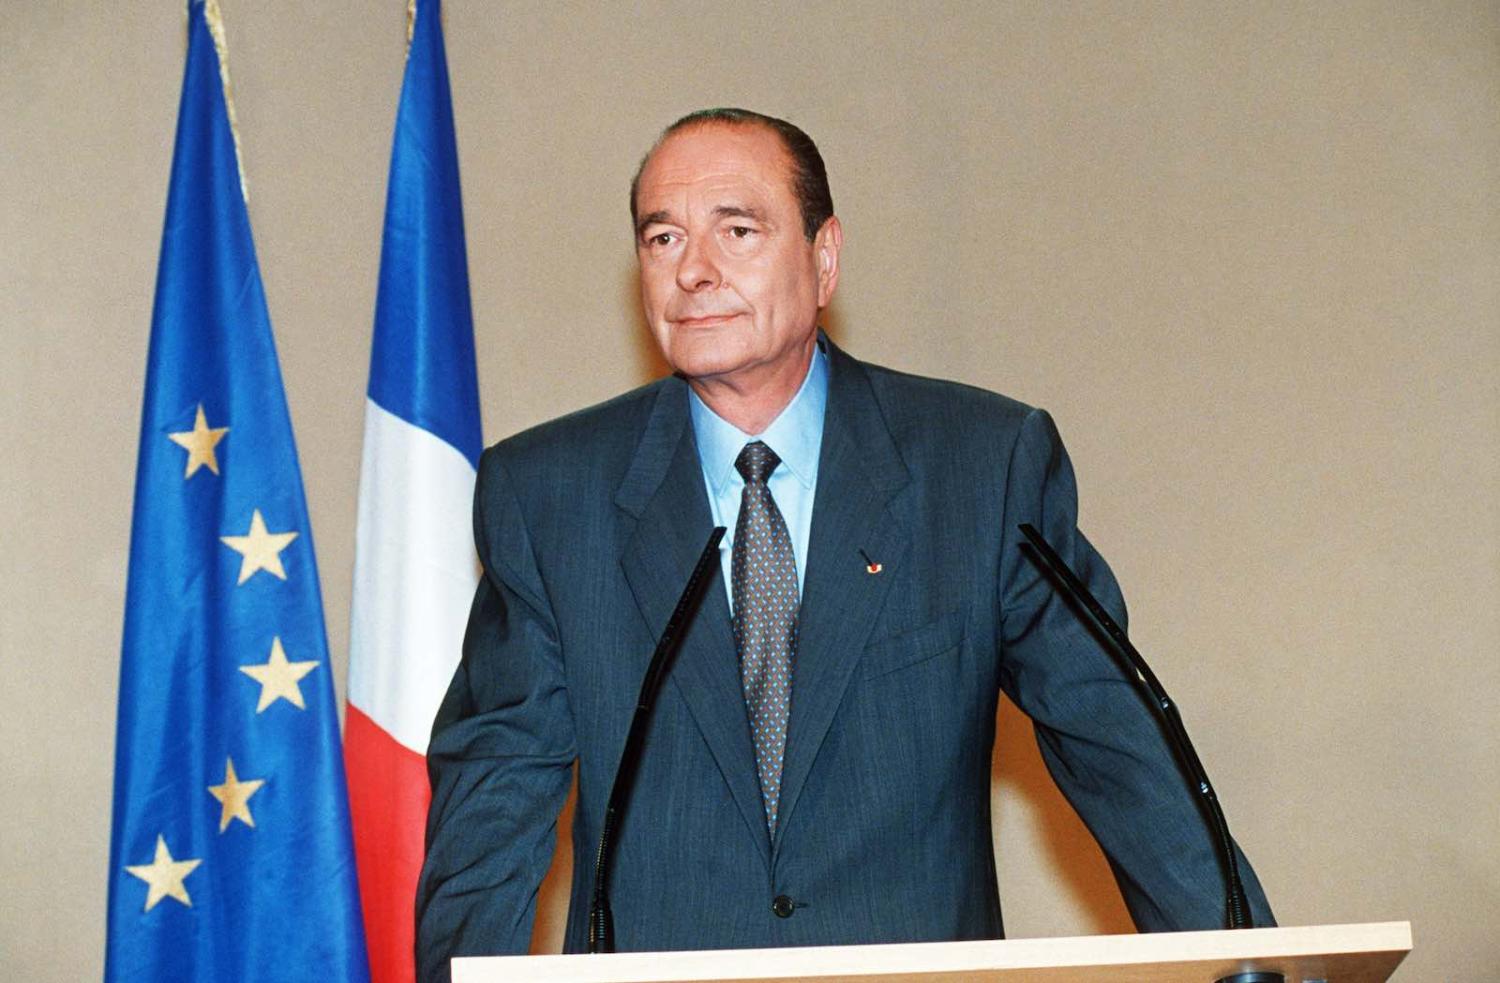 French President Jacques Chirac in June 1995 (Photo: AFP/Getty Images)